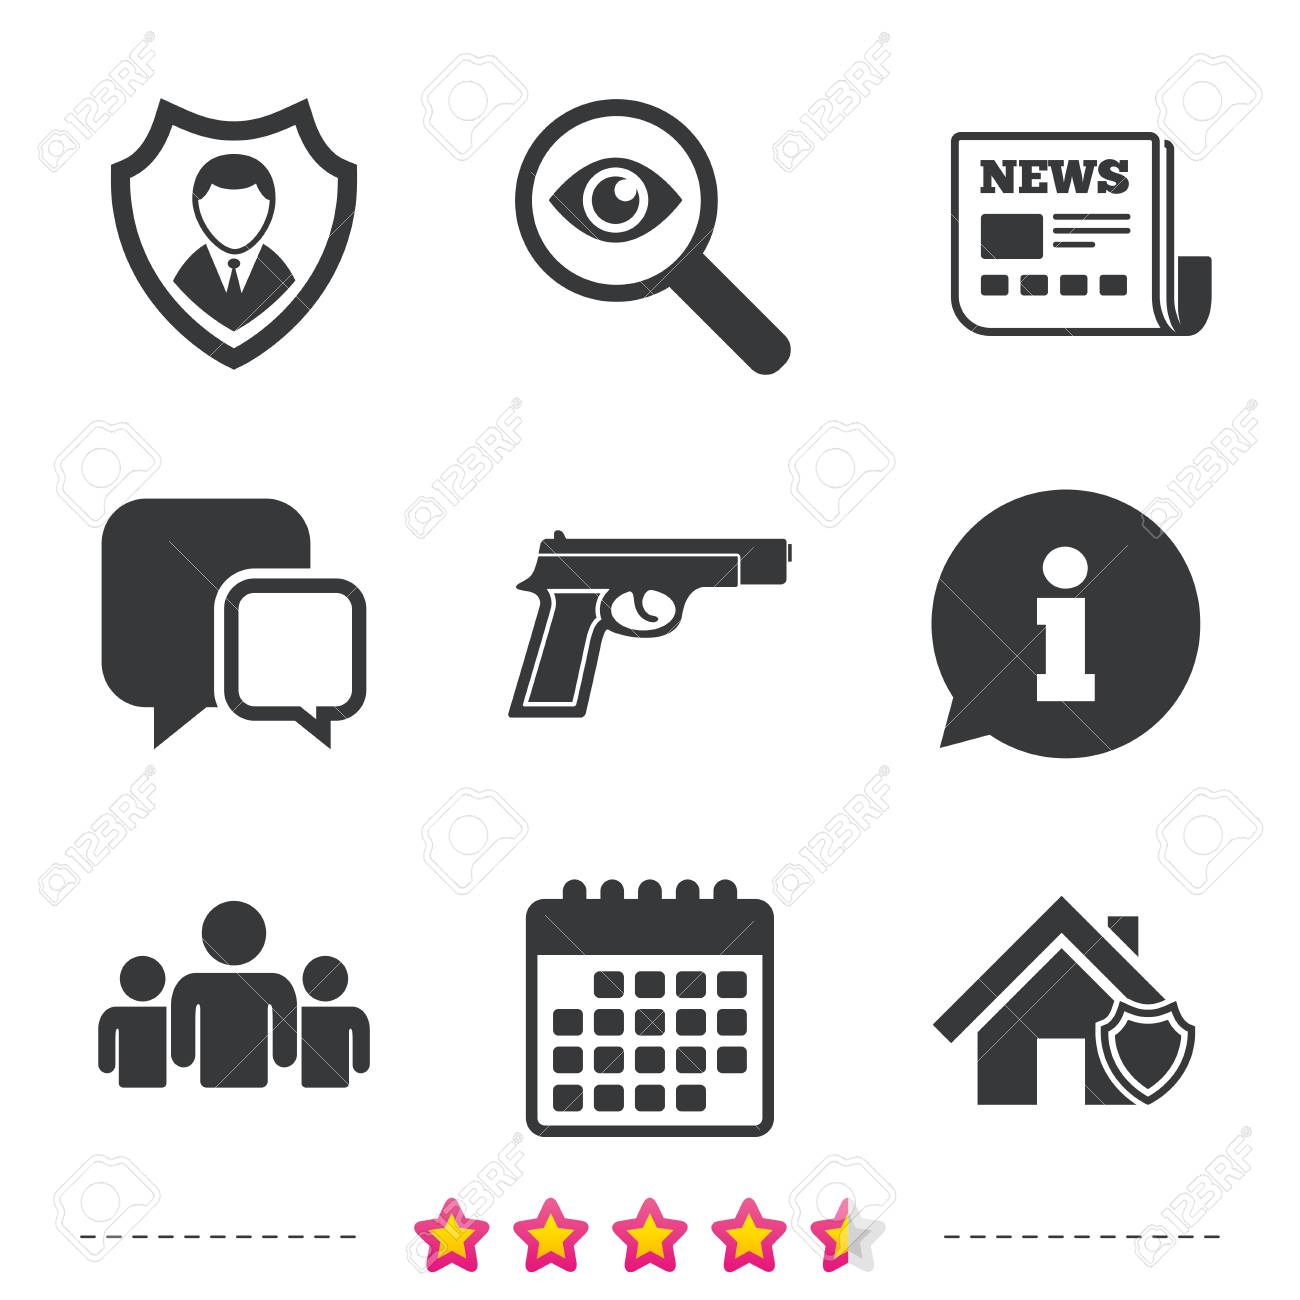 Crosshair Icons Target Aim Signs Symbols Stock Vector 599377991 